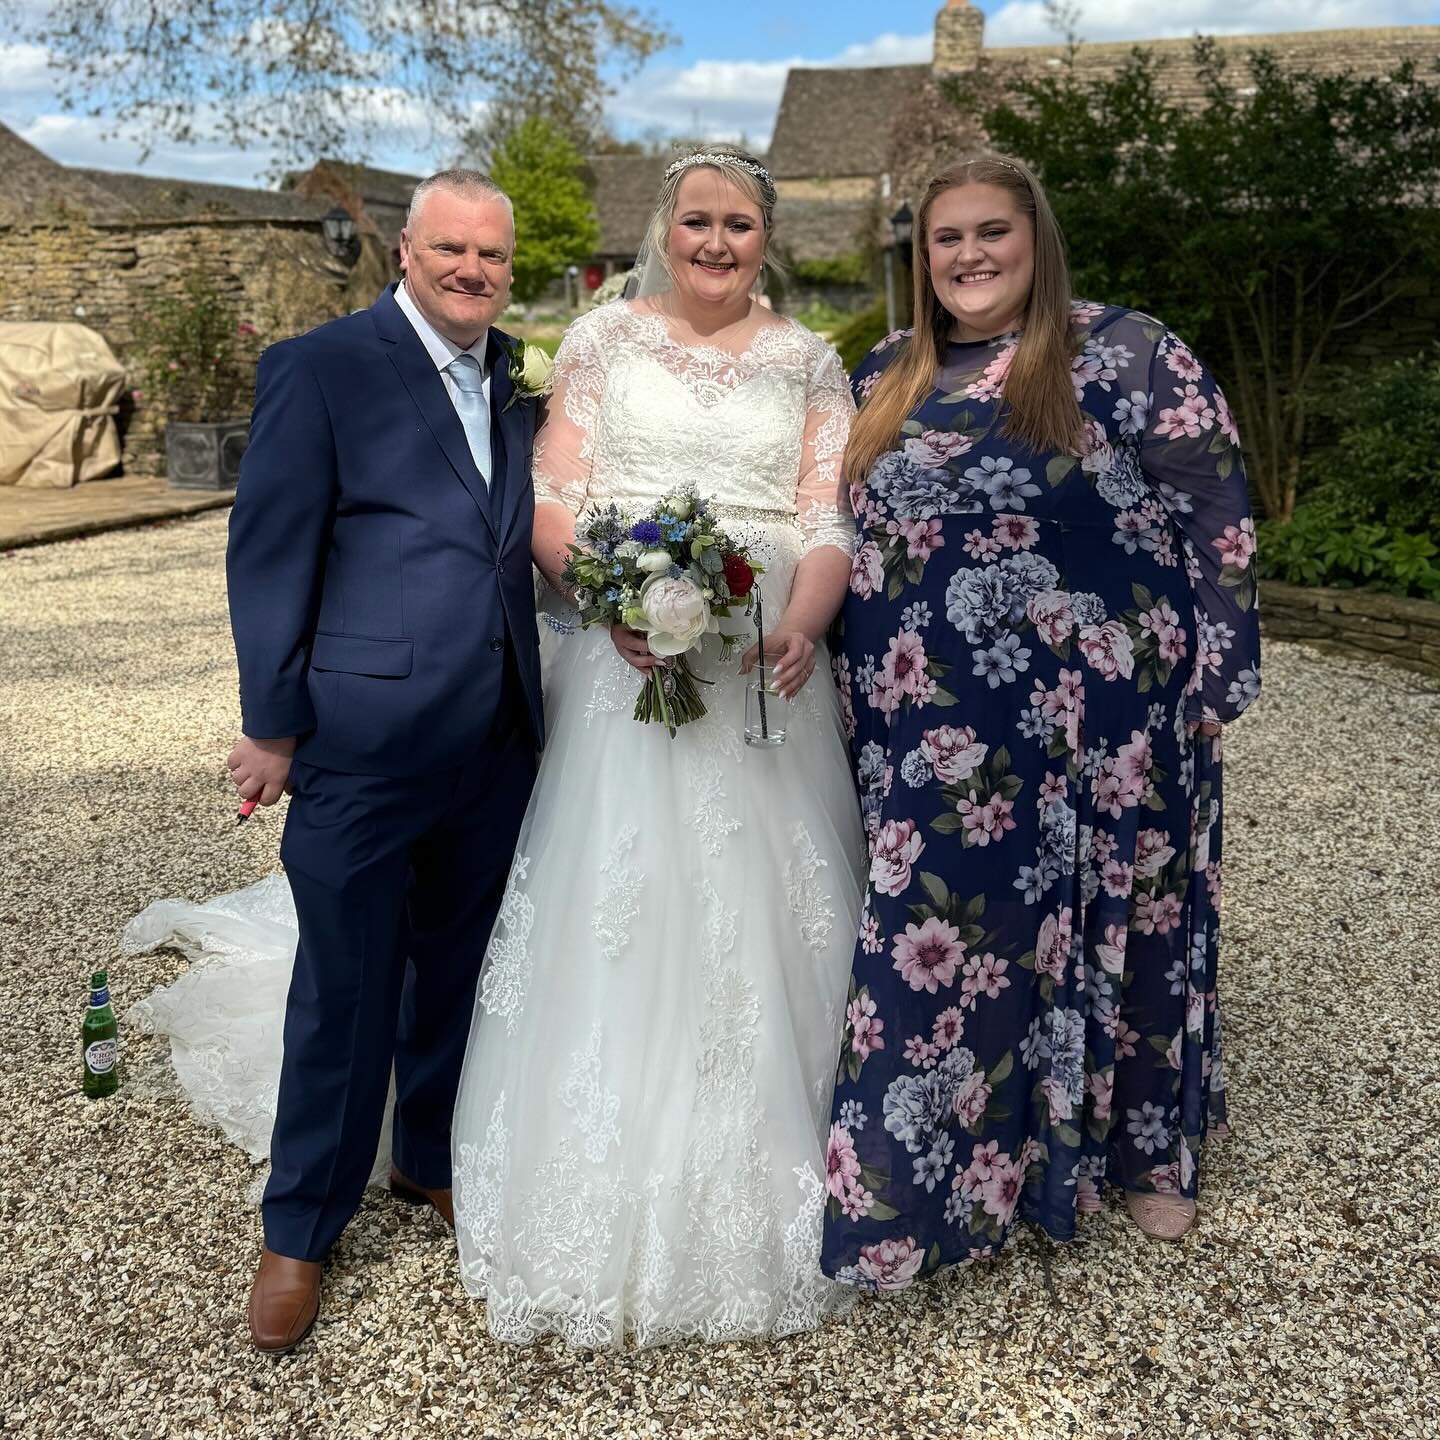 💒 Mr and Mrs Anderson - The Great Tythe Barn, 20th April 2024 💒

This was honestly such a beautiful (and quite windy 😂) day for Mr and Mrs Anderson at @thegreattythebarn on Saturday 🫶🏻

The sun was shining, the birds were singing and so was I! I